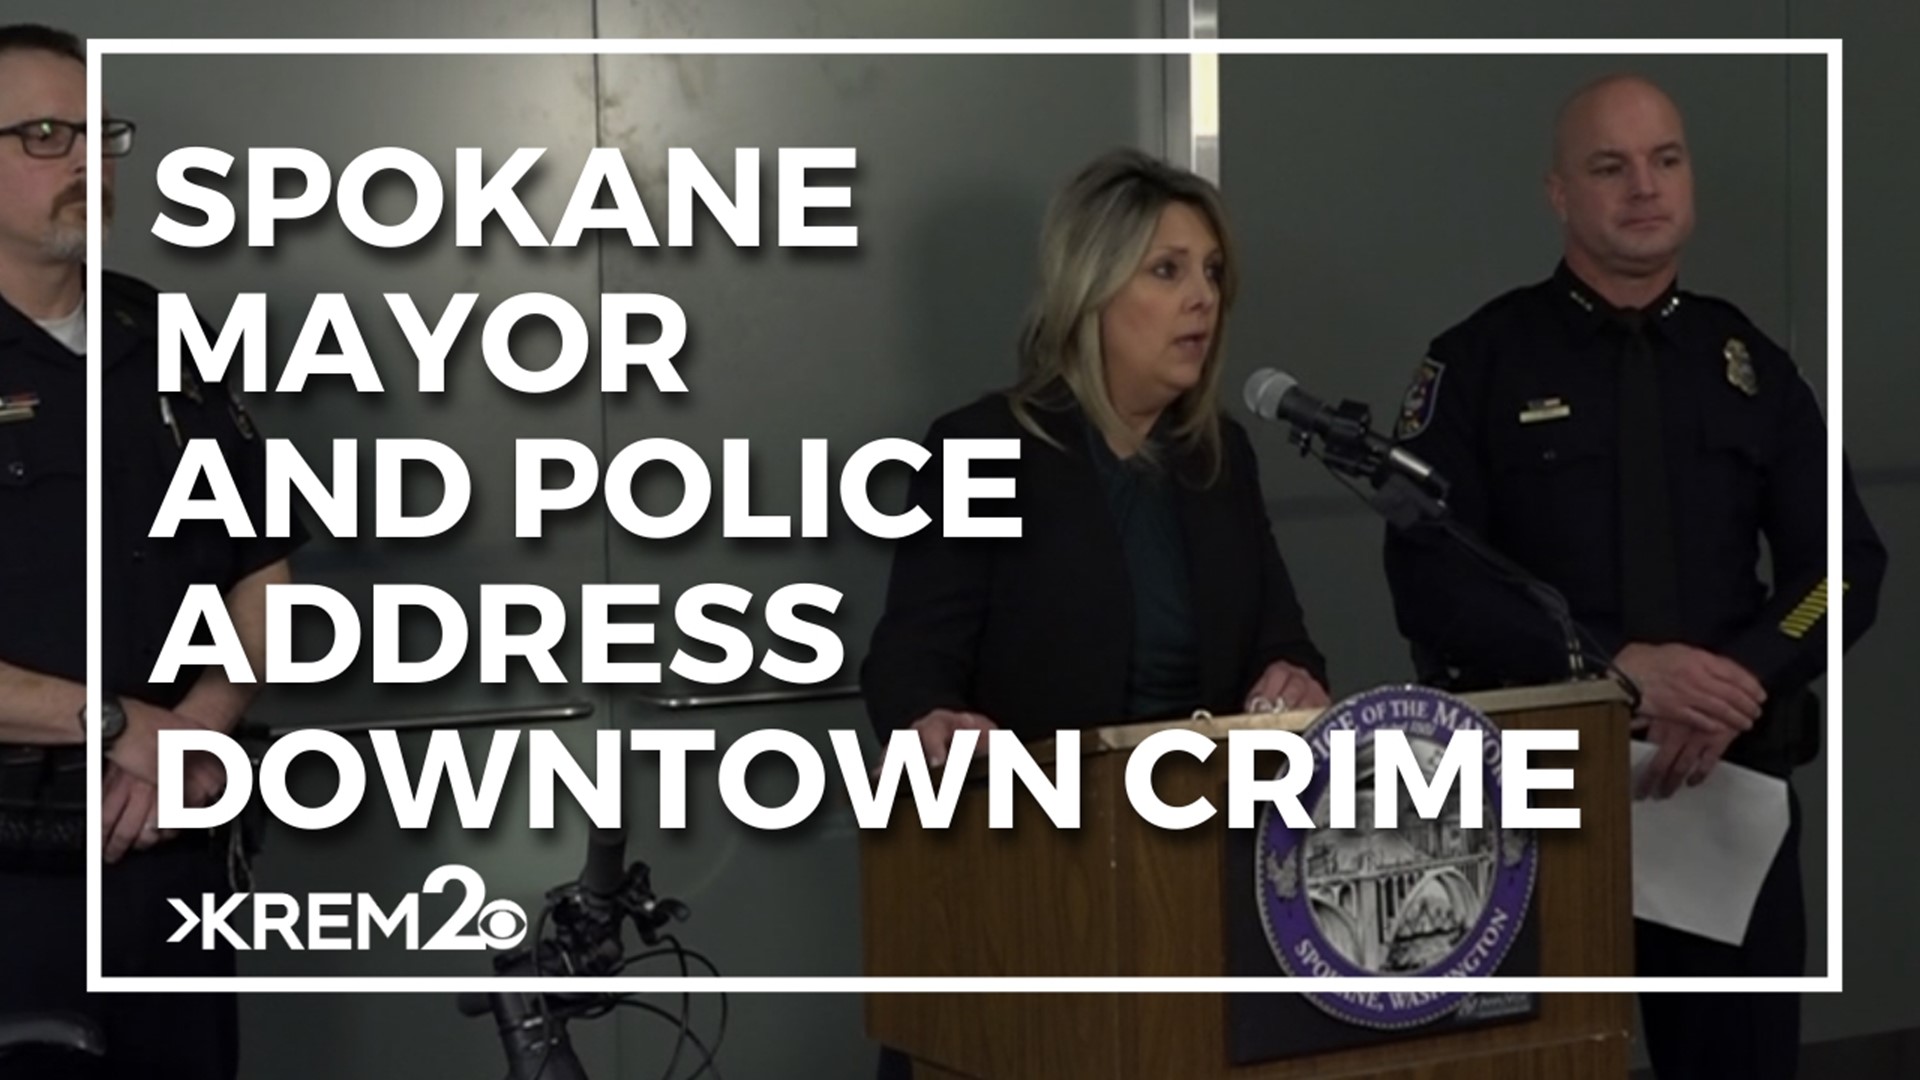 The mayor and police department said measures are being taken to decrease crime in downtown Spokane.